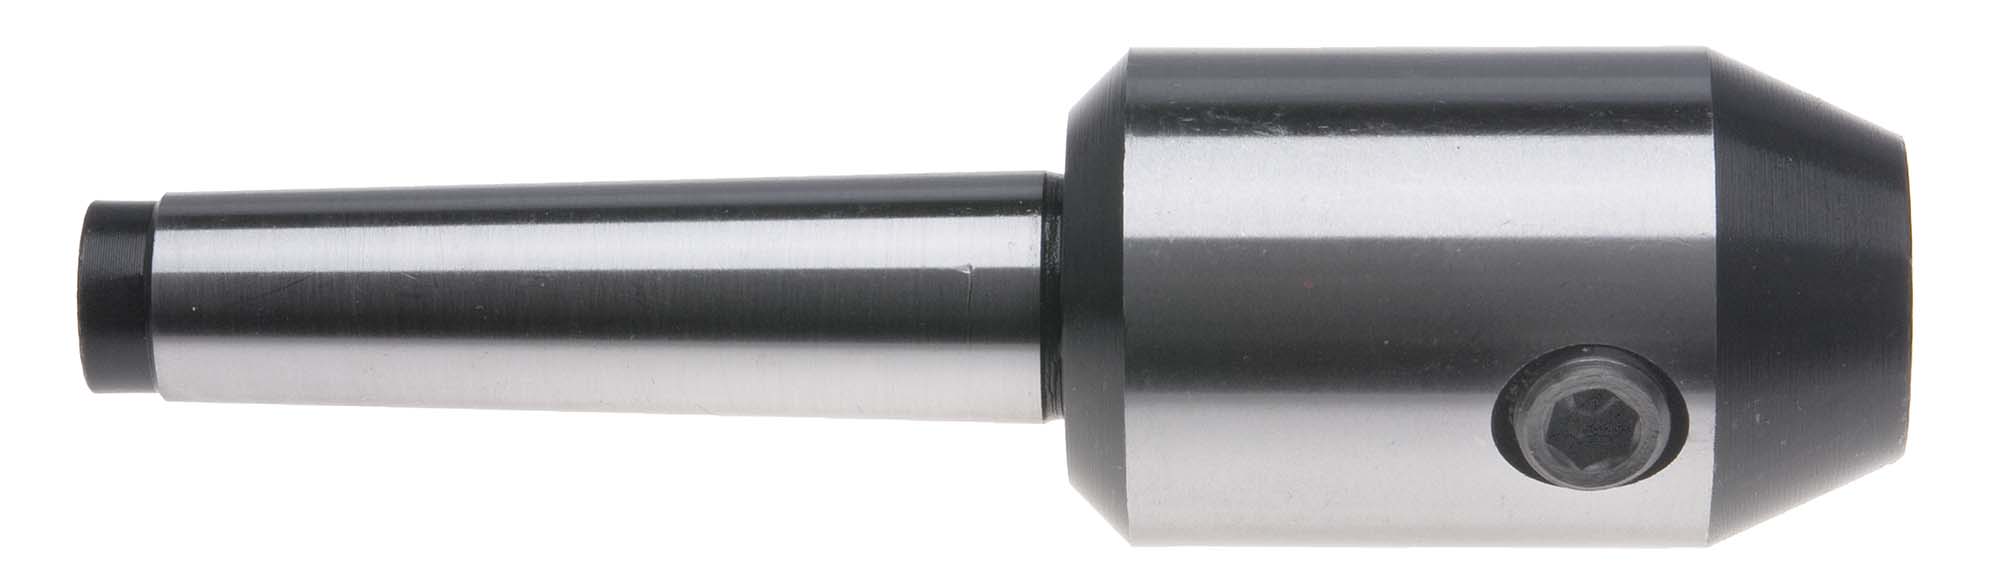 3 MT-1/2 End Mill Adapter with Drawbar End